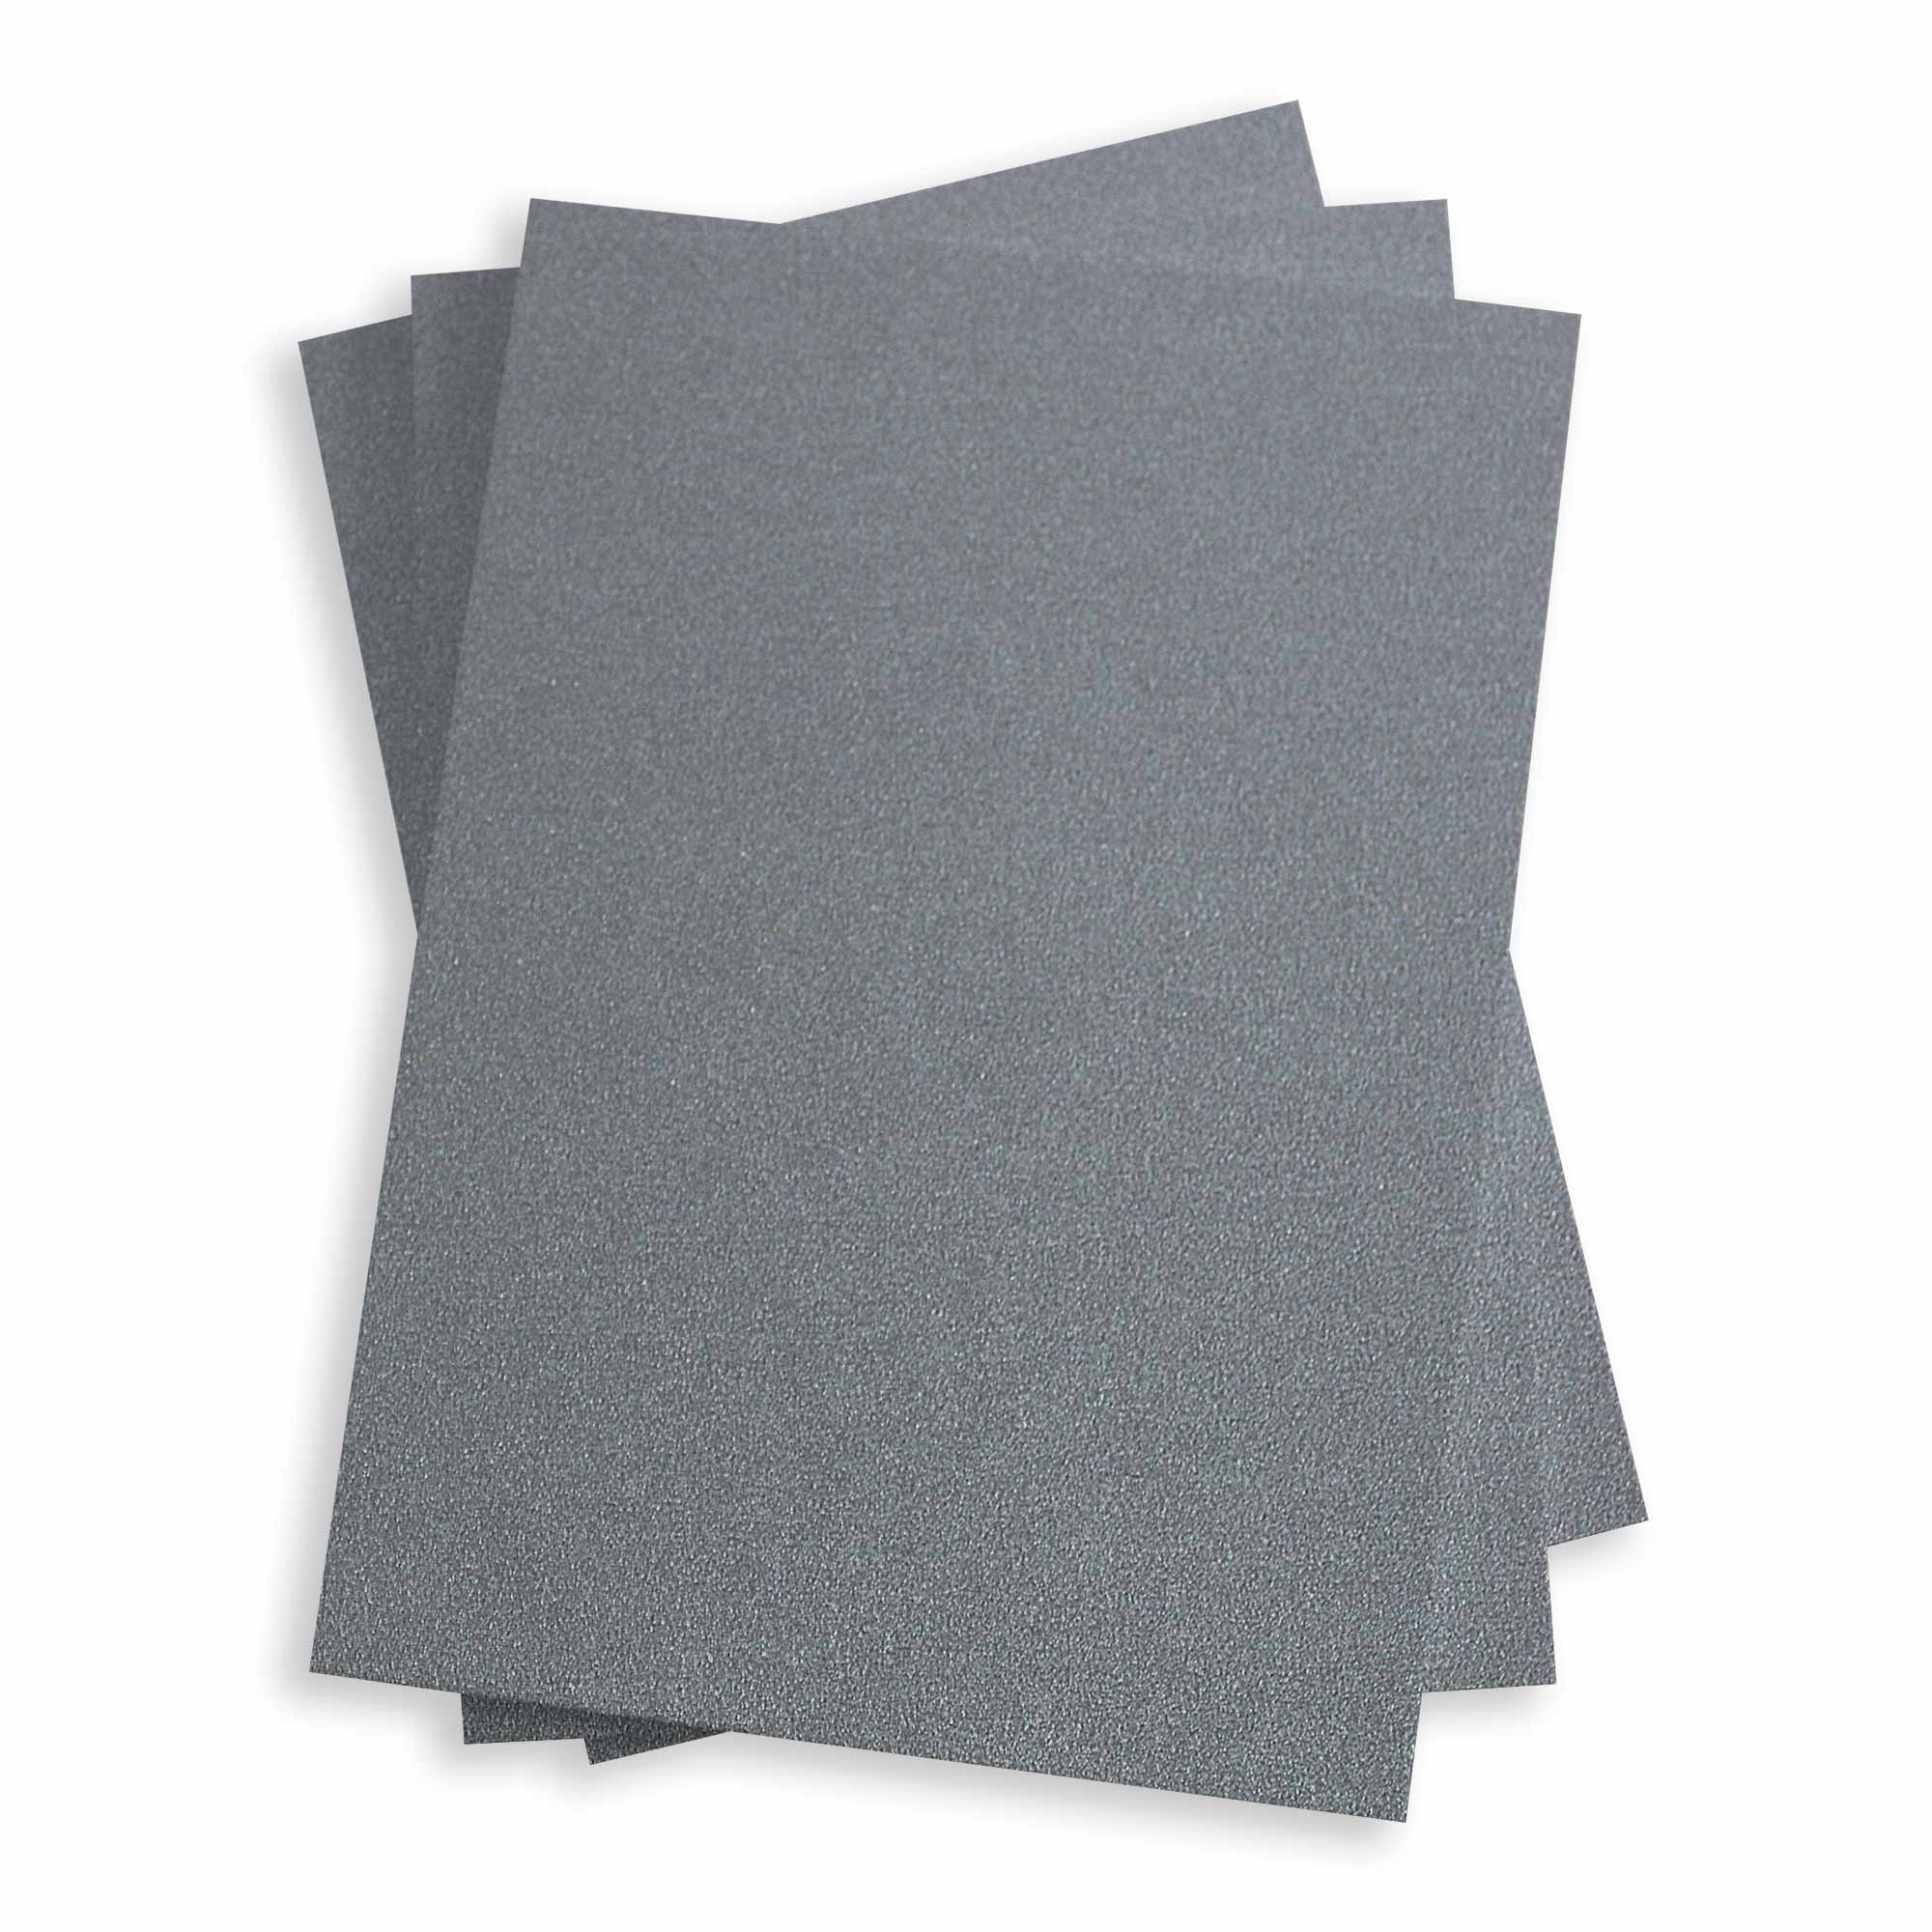 5” x 7” Curious Metallic Flat Note Cards - Ice Silver Cardstock Smooth and  Beautiful Shine Finish - 111lb Cardstock | 25 Per Pack